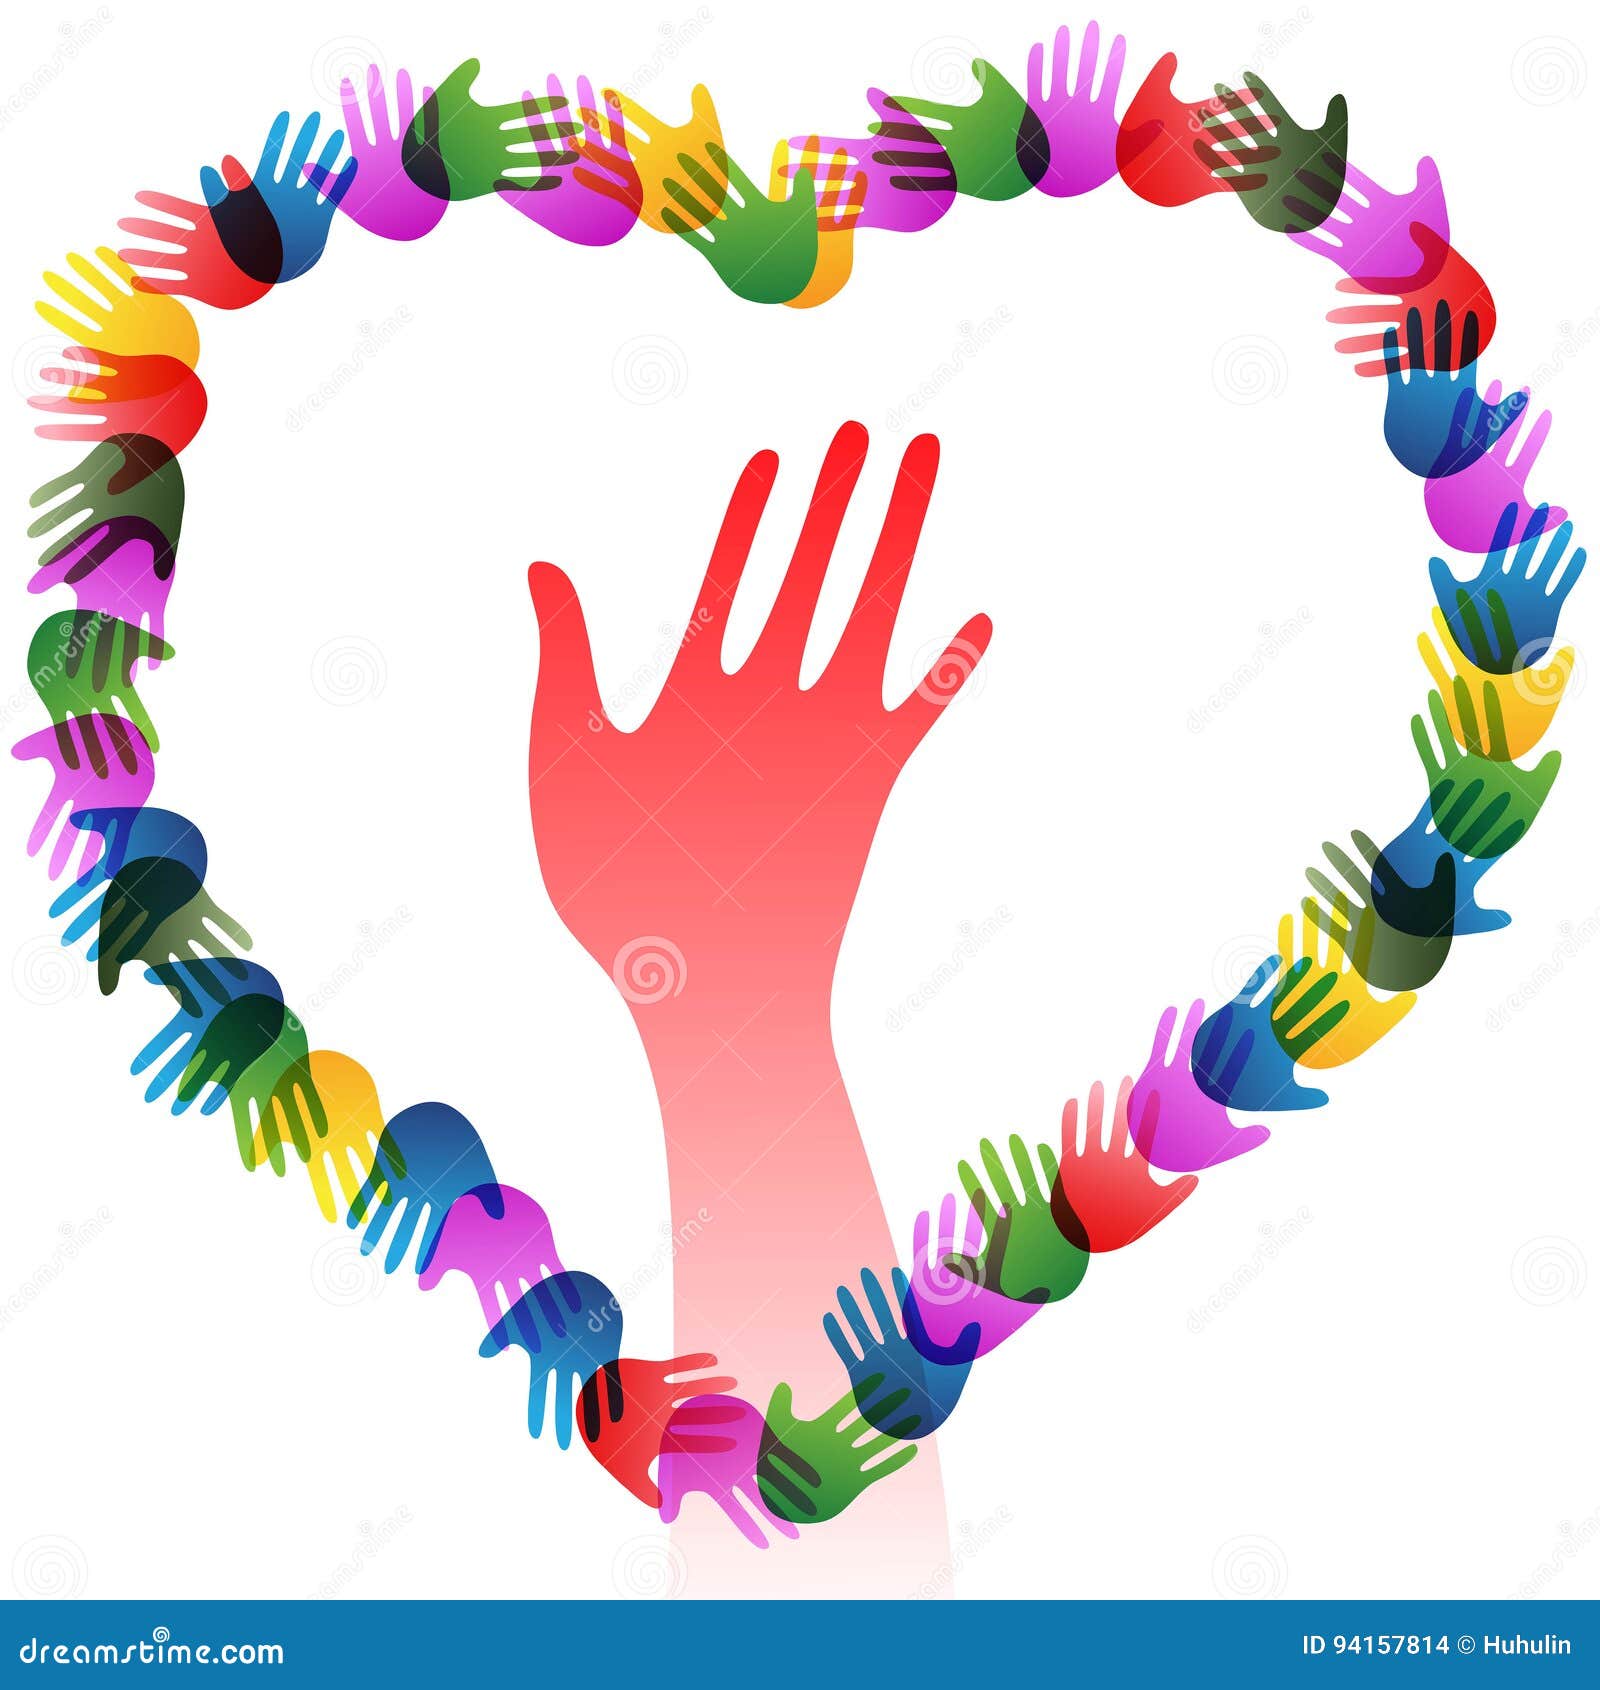 Colorful Hands Holding Forming Heart Stock Vector - Illustration of ...